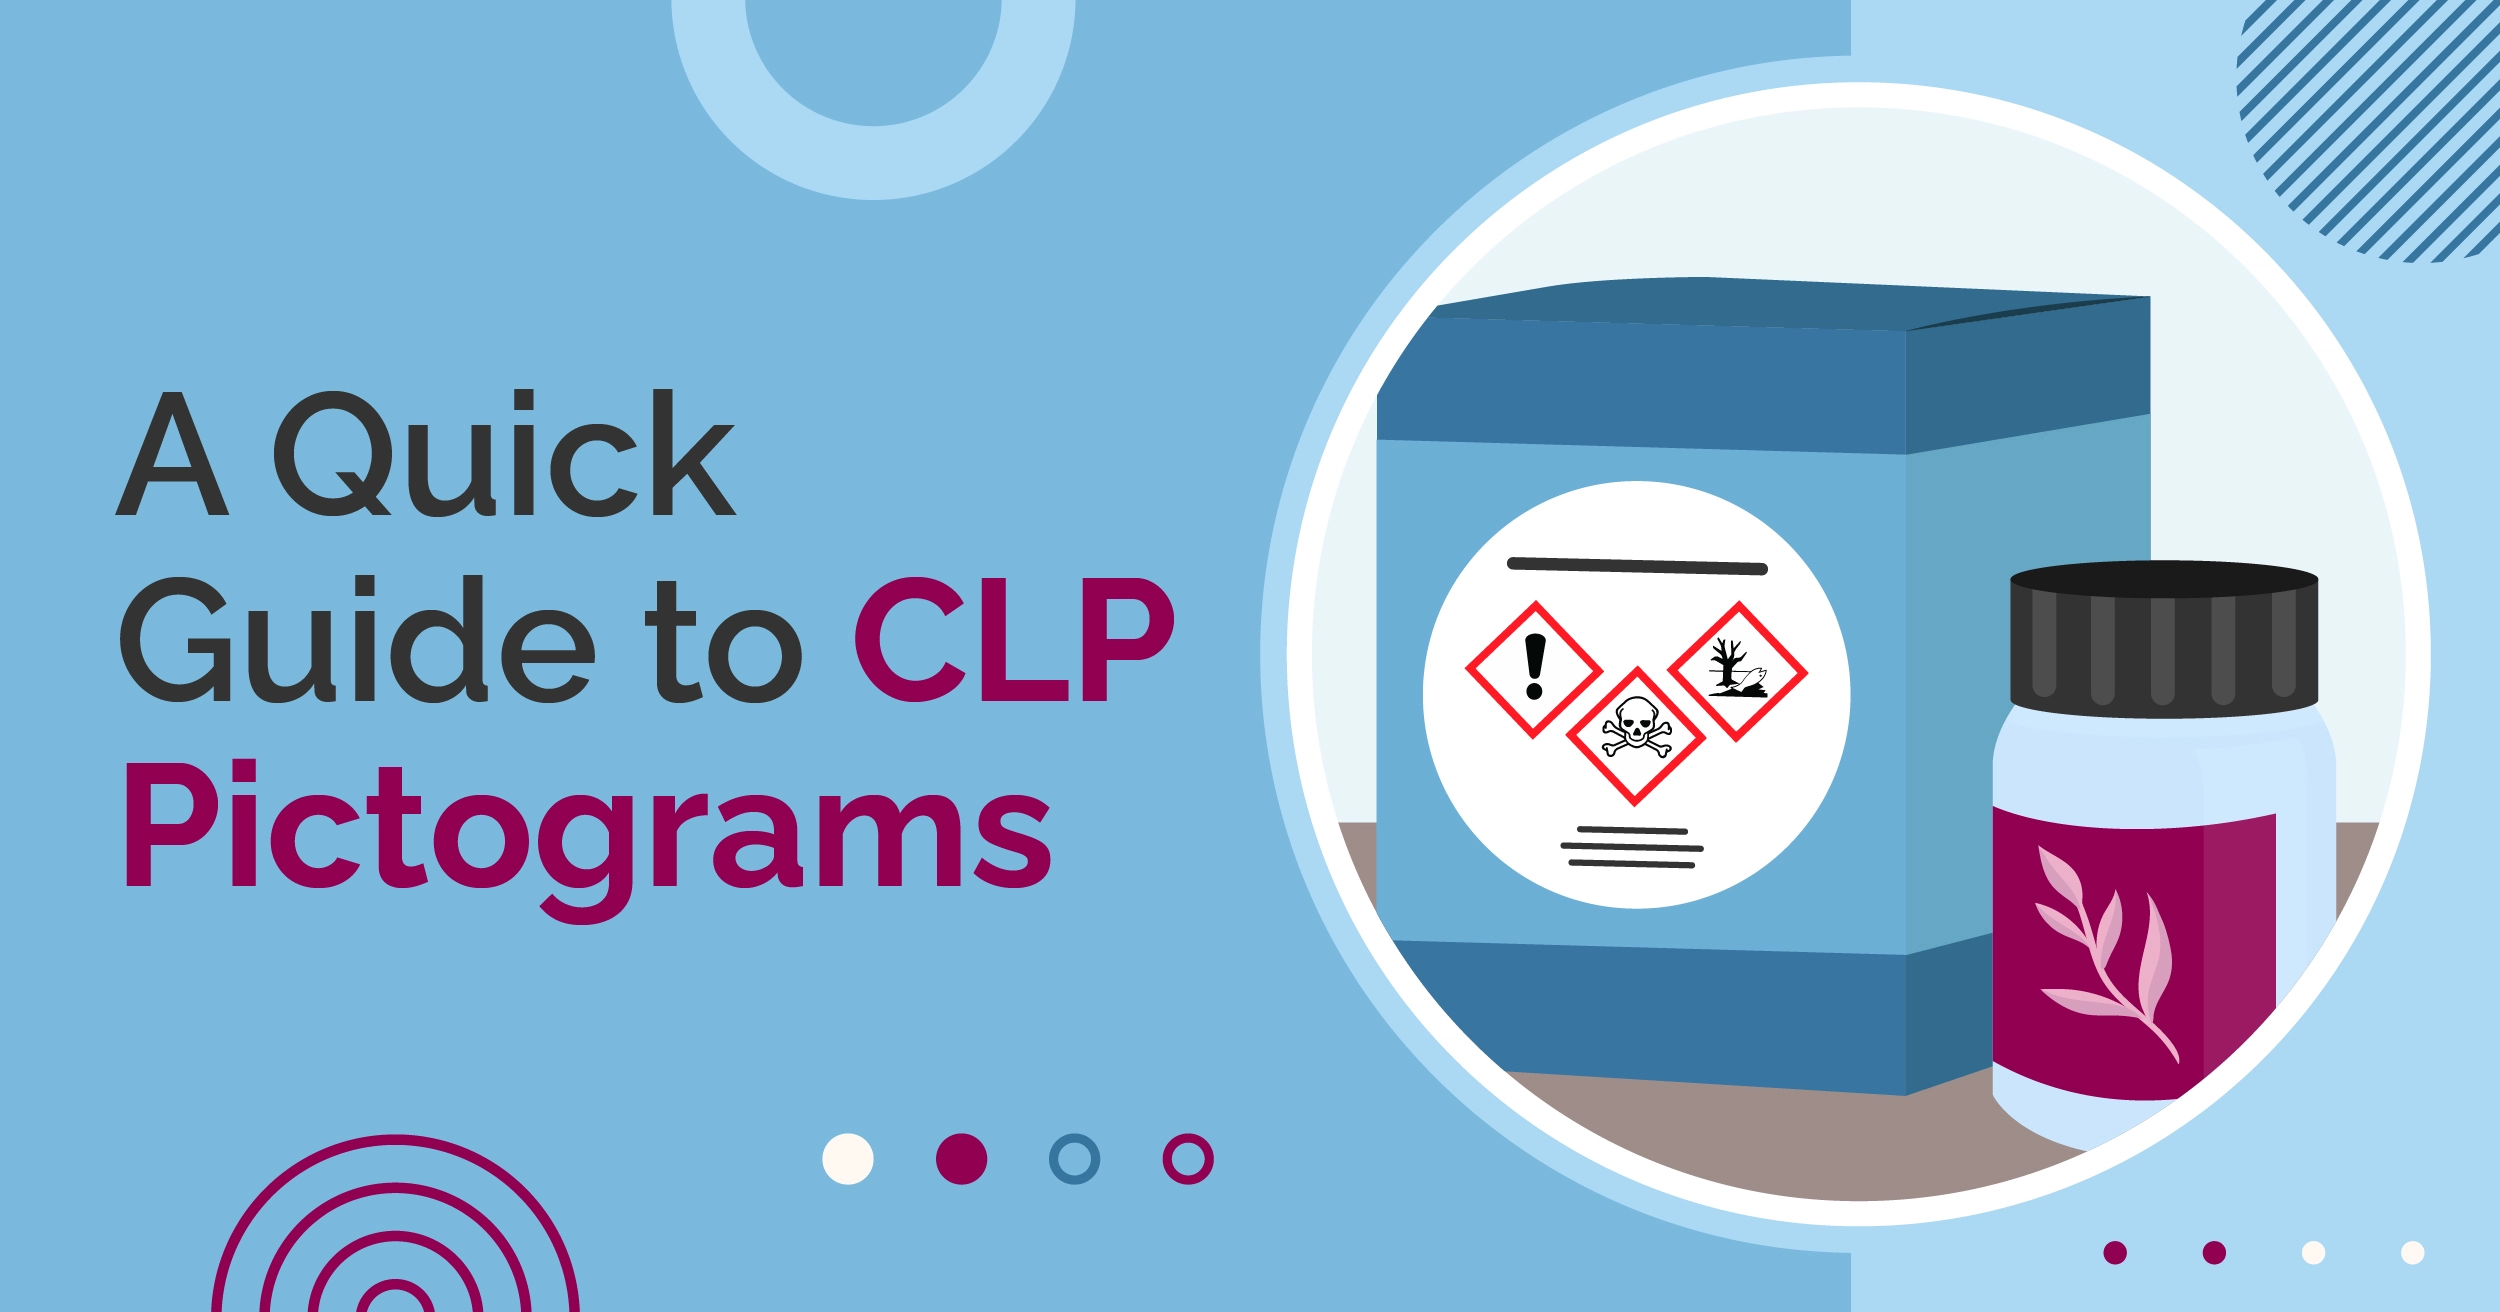 A Quick Guide to CLP Pictograms